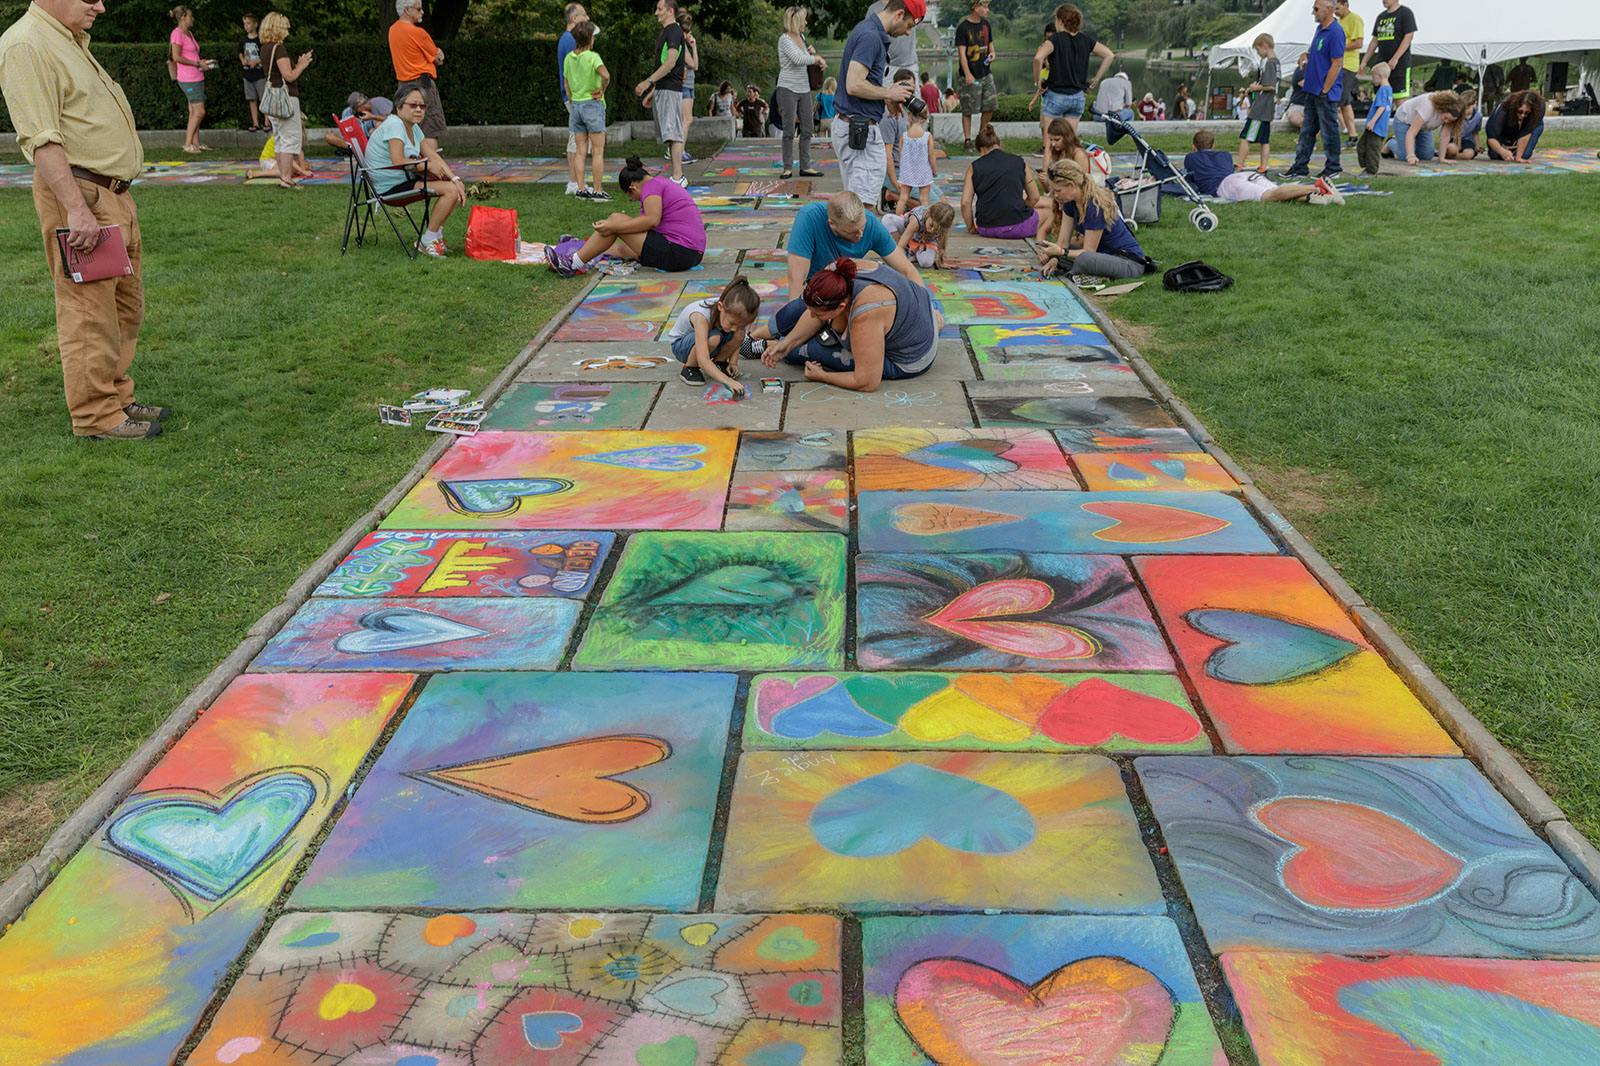 Colorful chalk drawings on stone walkway; children and adults draw on stones in background